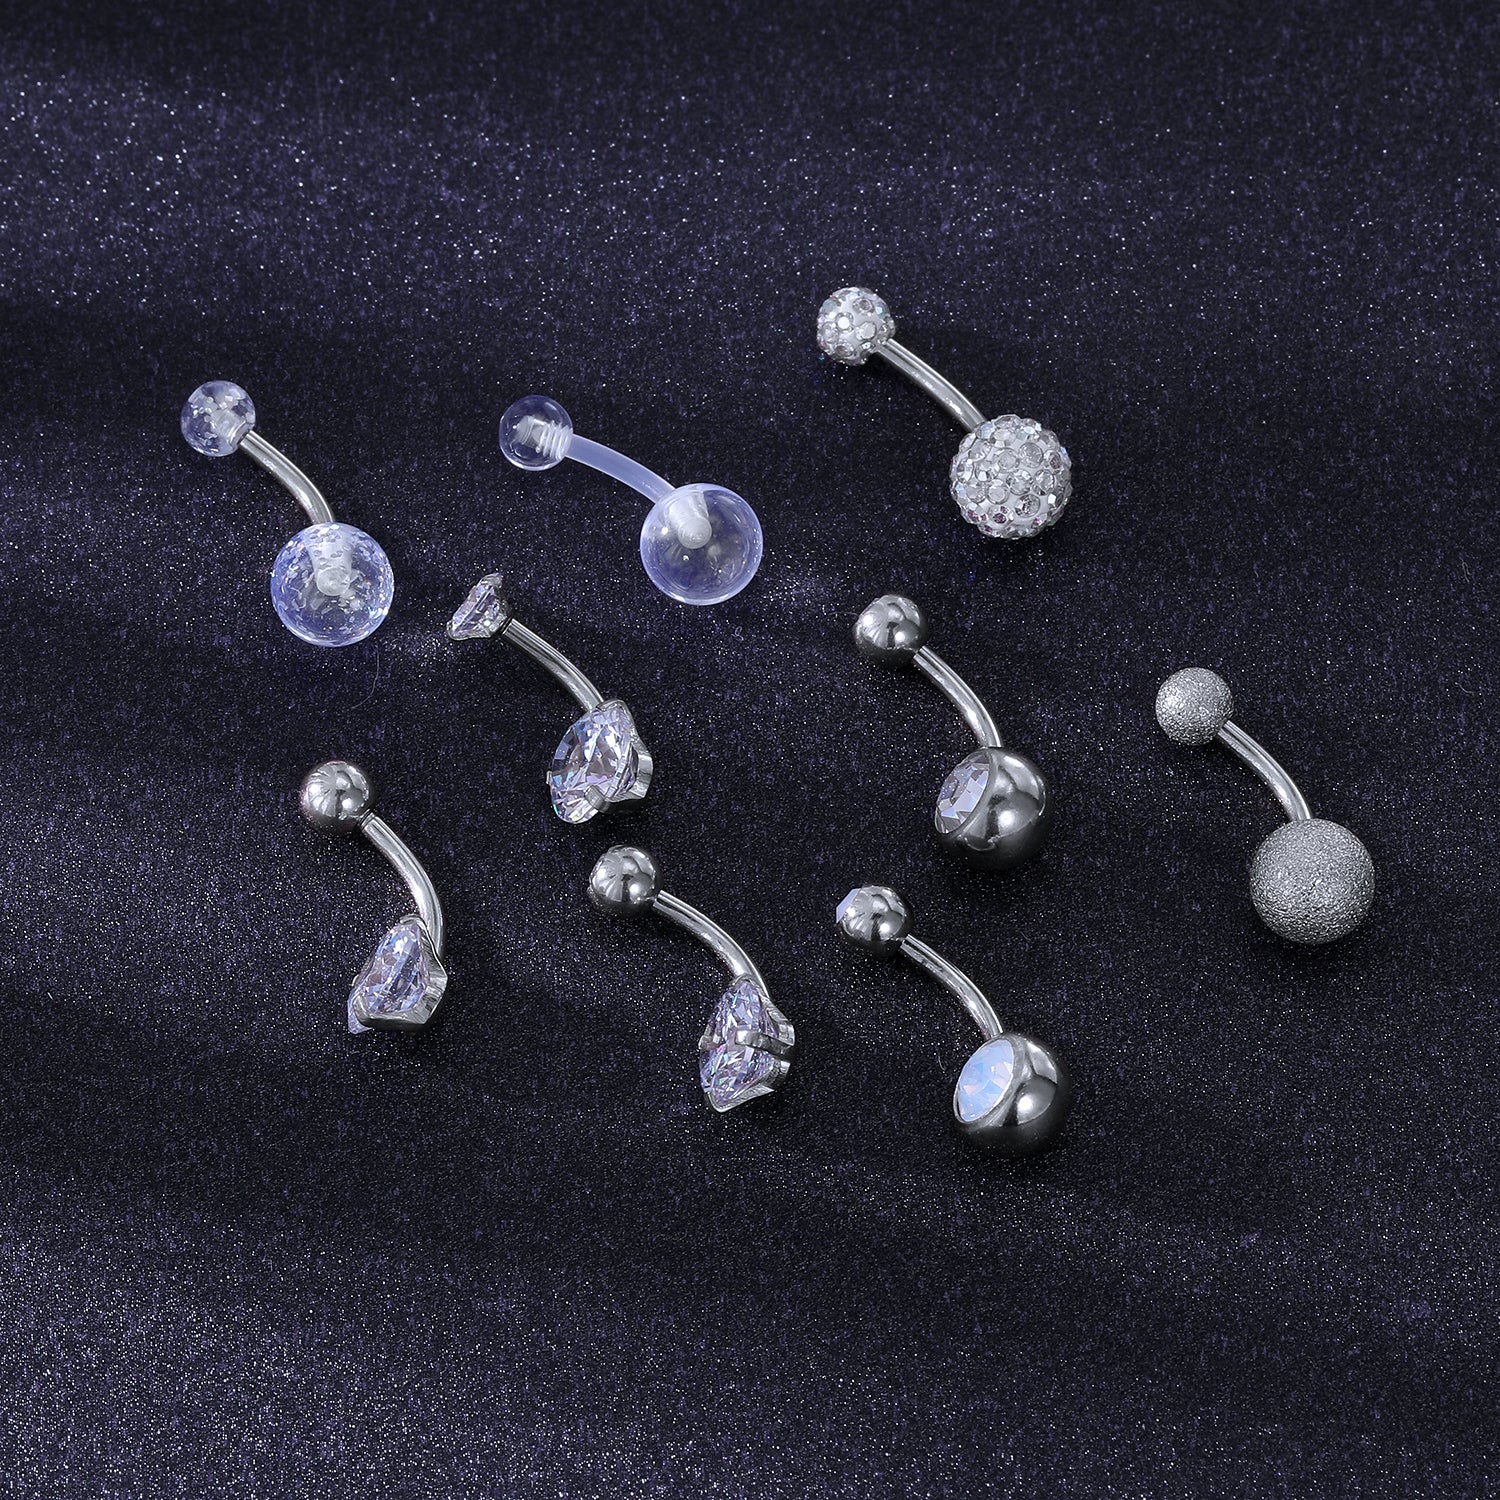  14g-Silver-Belly-Button-Rings-Crystal-Opal-Navel-Piercing